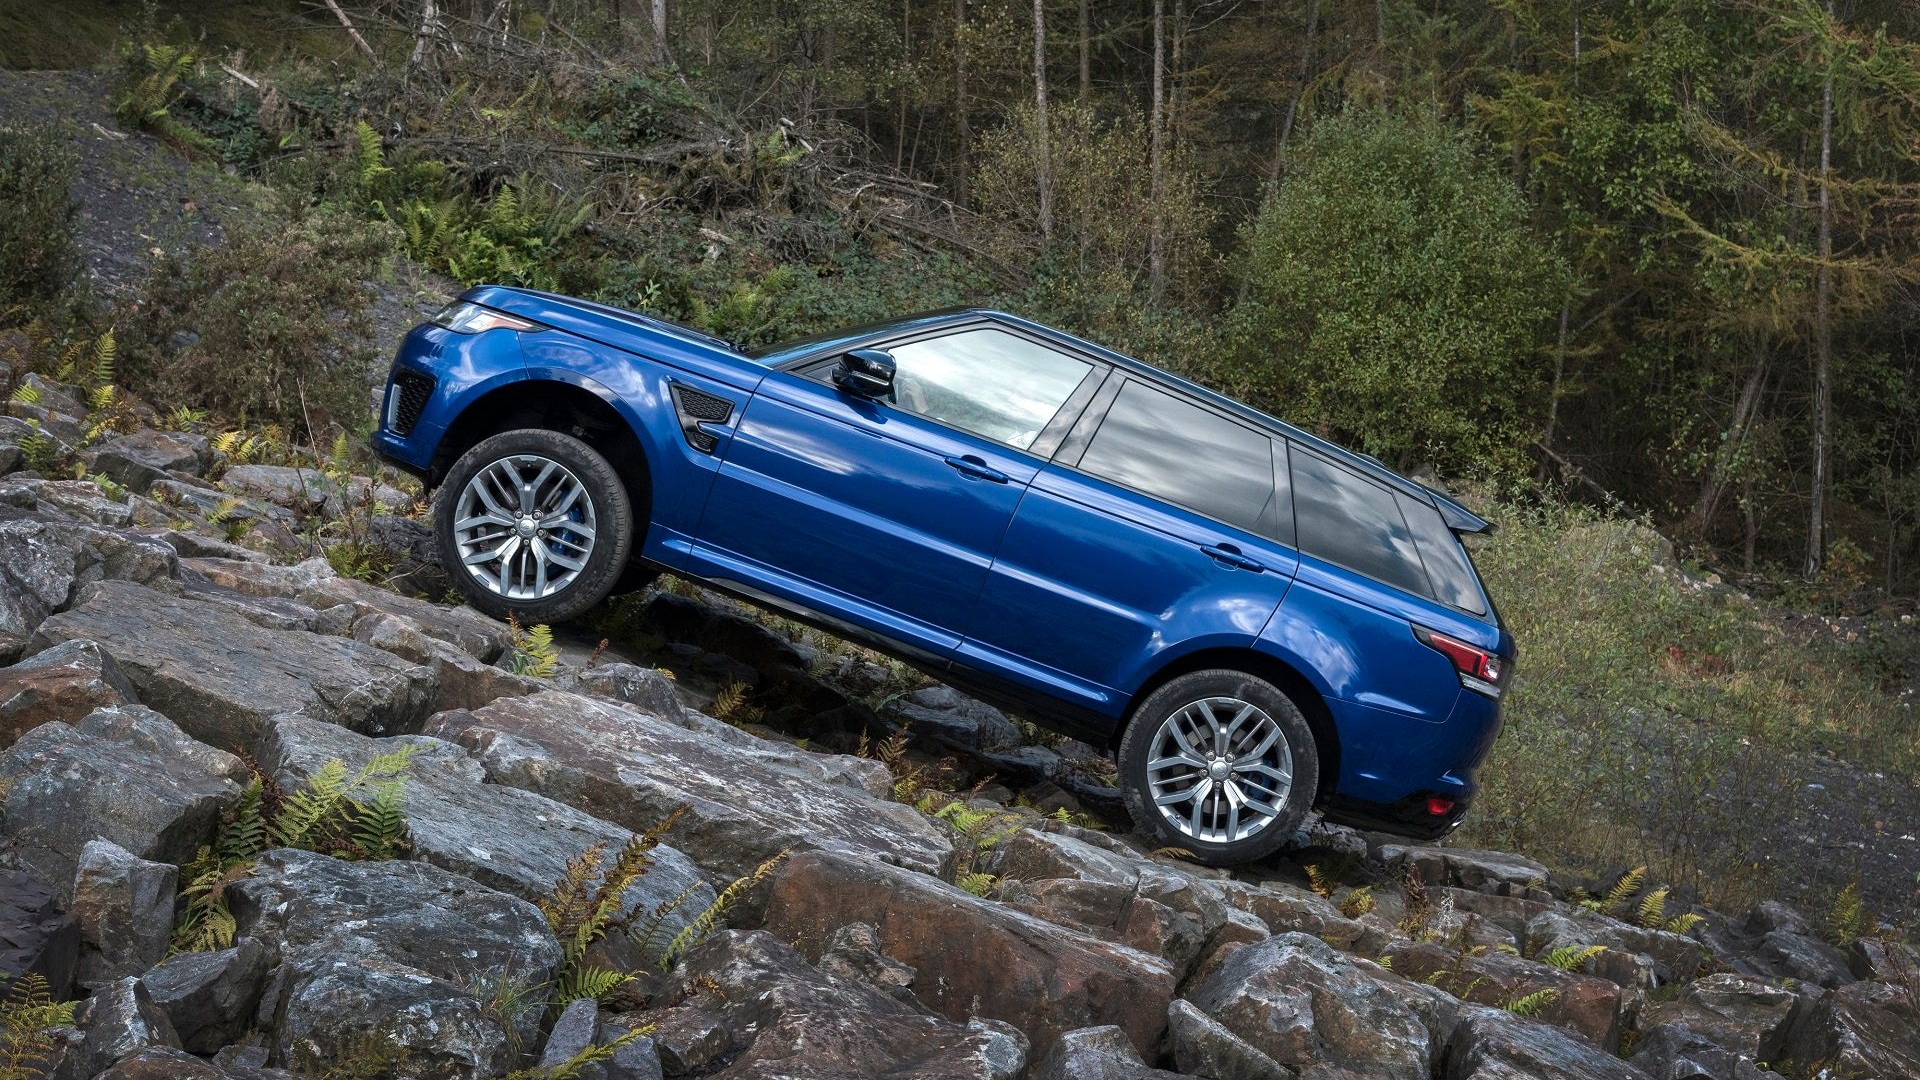 Land Rover conducts allterrain 060 mph testing with the Range Rover